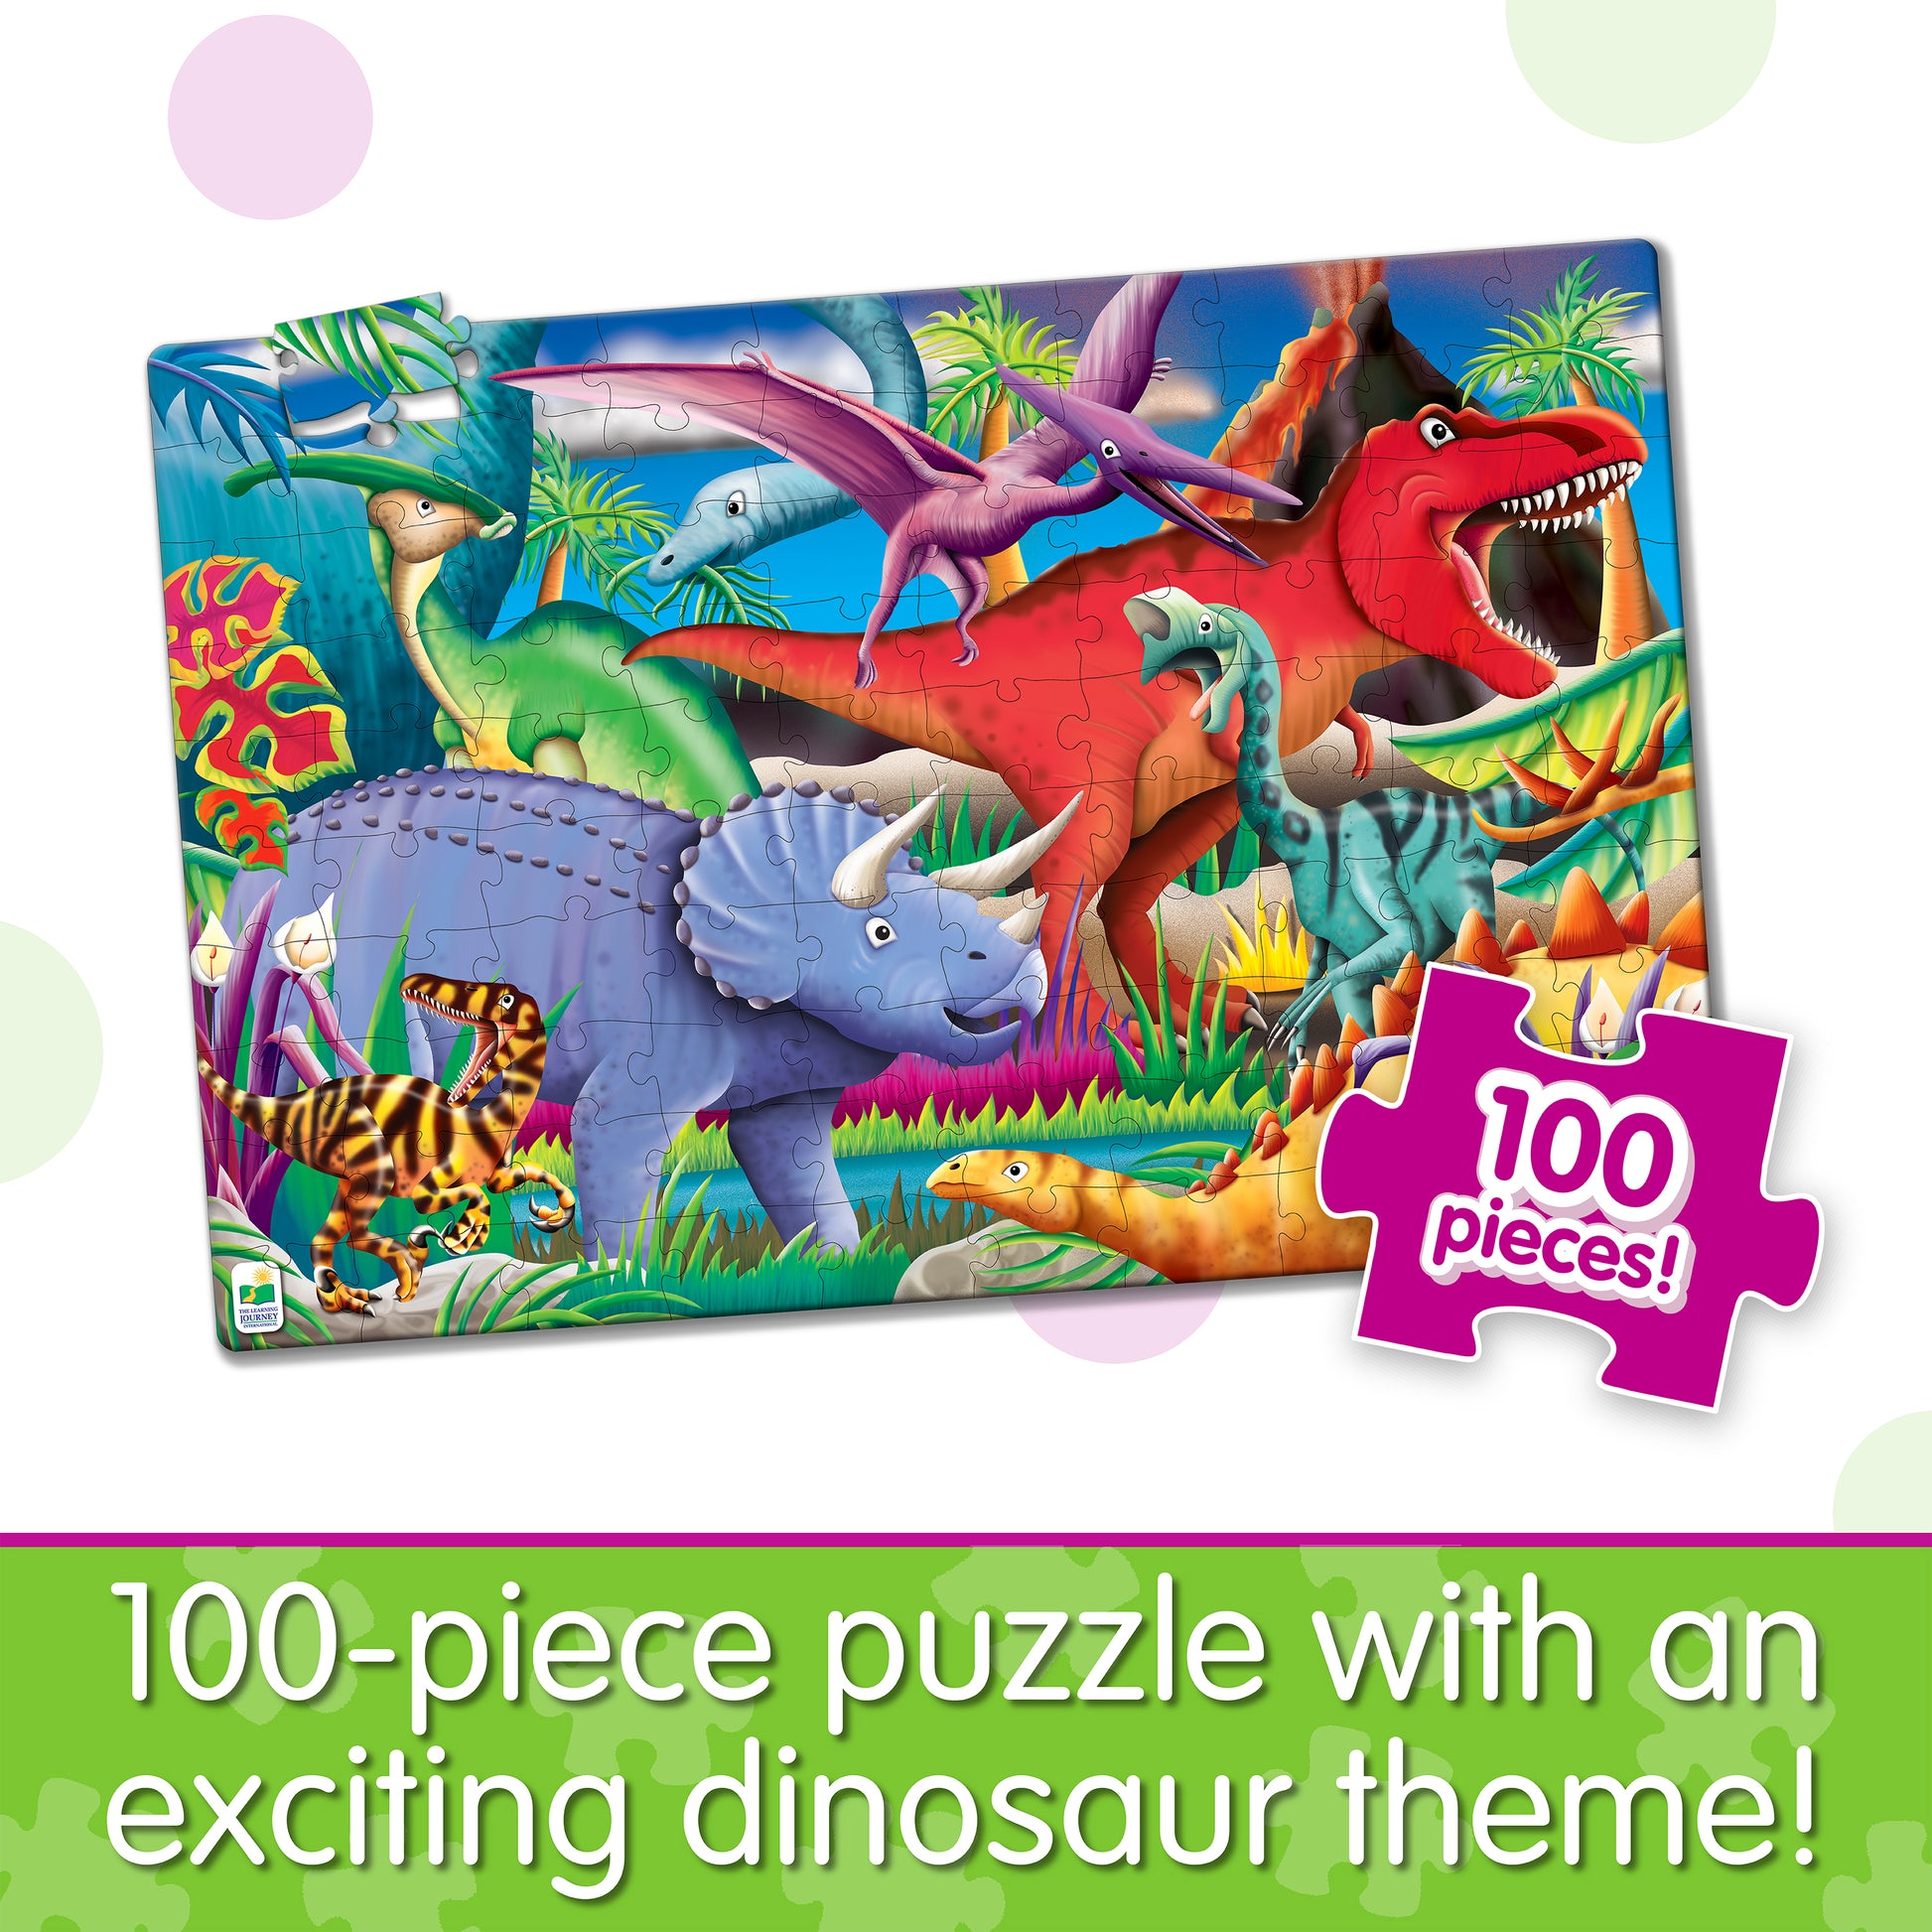 Infographic about Glow in the Dark - Dinos that says, "100-piece puzzle with an exciting dinosaur theme!"